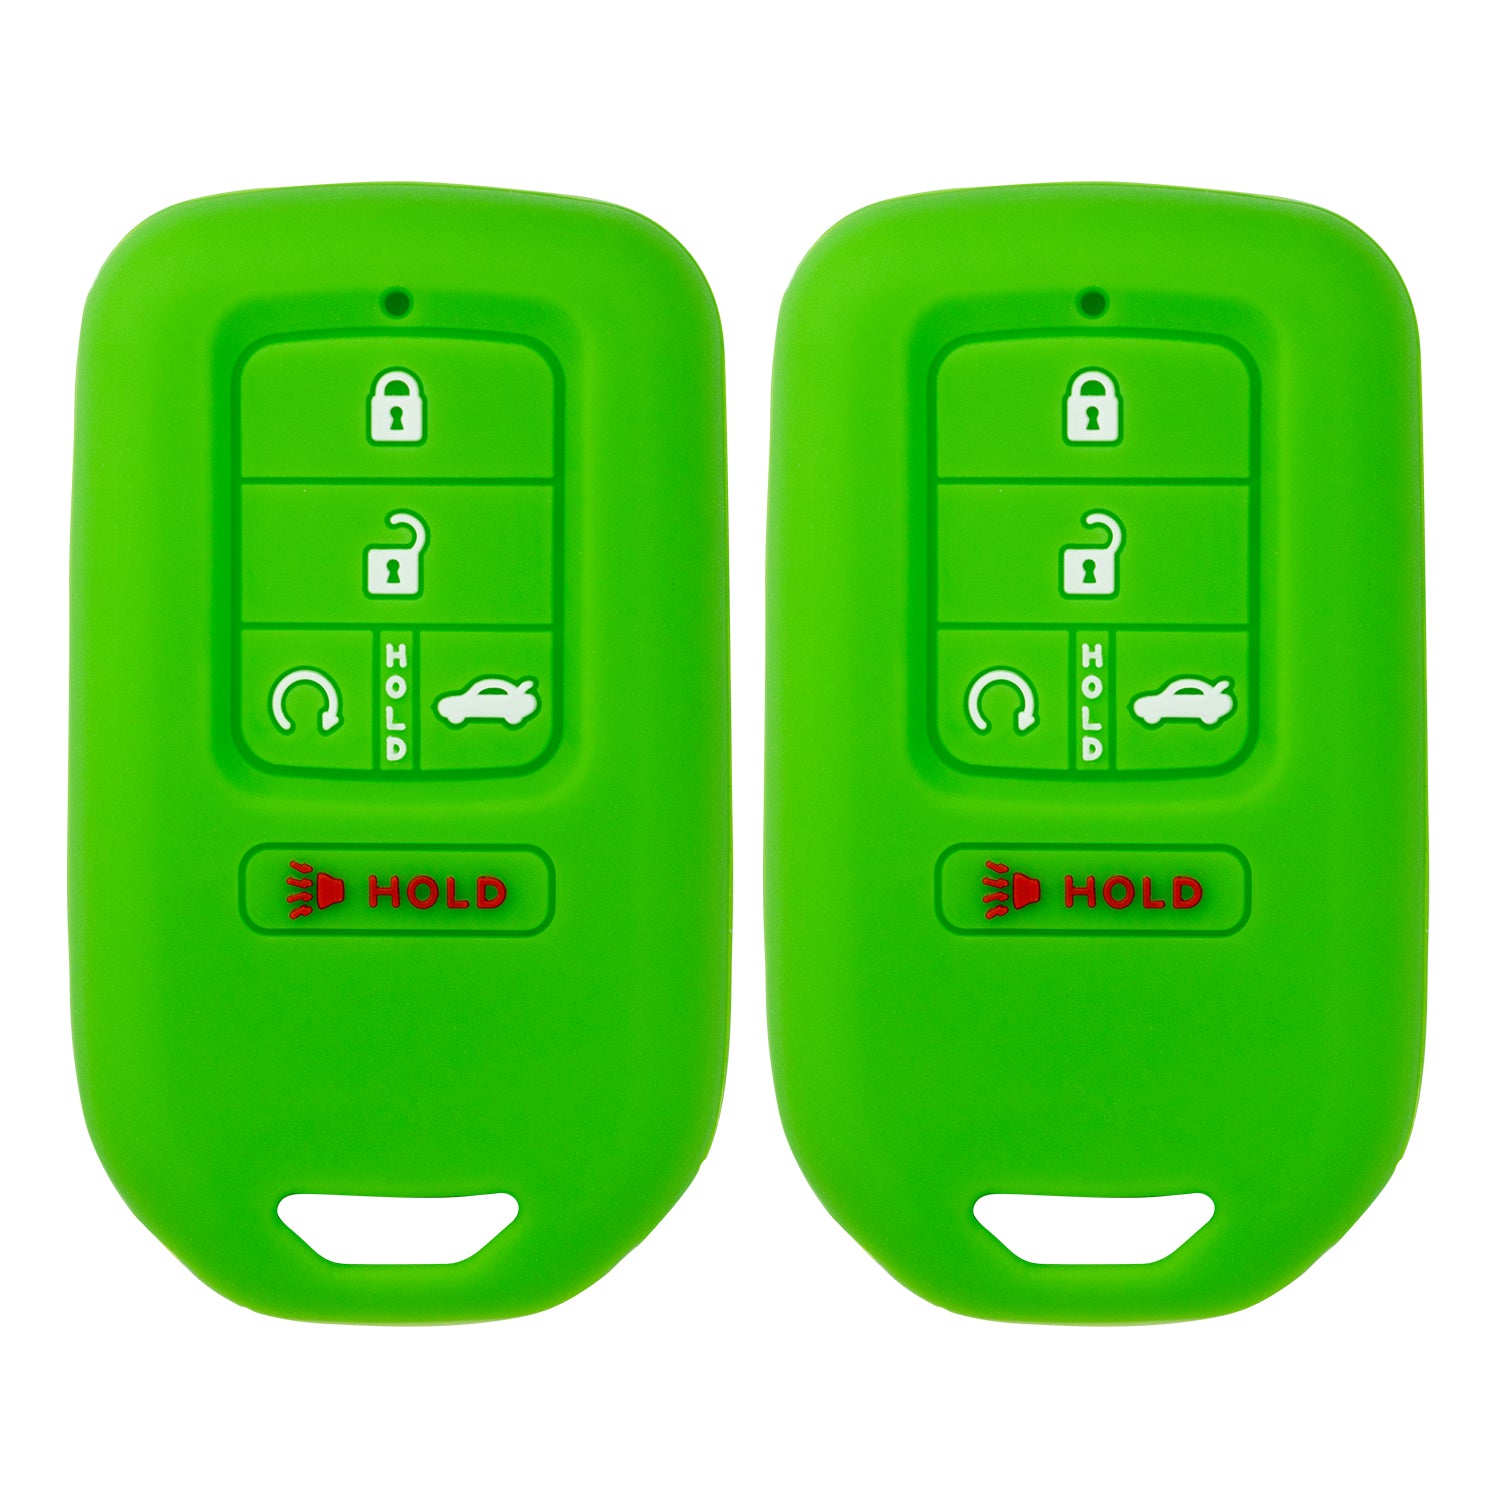 Silicone Case for Keyless entry Smart key fob for Honda Accord Civic CR-V CRV Pilot Passport Insight EX EX-L Touring | Car Accessory | Key Protection Case 2 Pcs (Double Green)